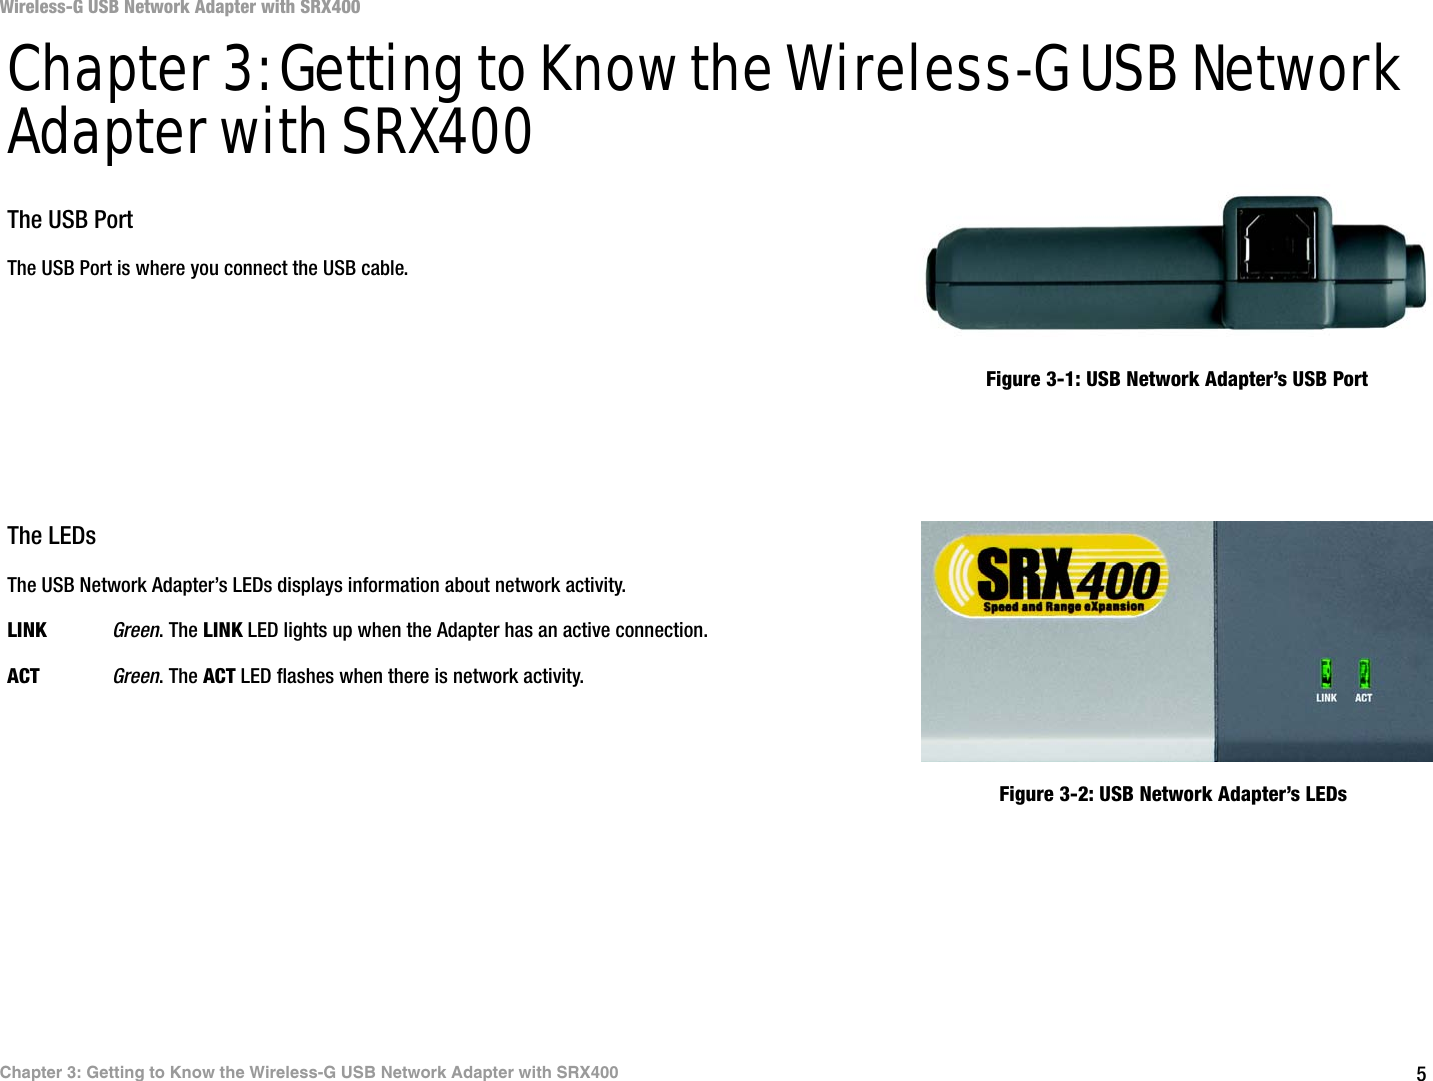 5Chapter 3: Getting to Know the Wireless-G USB Network Adapter with SRX400Wireless-G USB Network Adapter with SRX400Chapter 3: Getting to Know the Wireless-G USB Network Adapter with SRX400The USB PortThe USB Port is where you connect the USB cable.The LEDsThe USB Network Adapter’s LEDs displays information about network activity.LINK Green. The LINK LED lights up when the Adapter has an active connection.ACT Green. The ACT LED flashes when there is network activity.Figure 3-1: USB Network Adapter’s USB PortFigure 3-2: USB Network Adapter’s LEDs